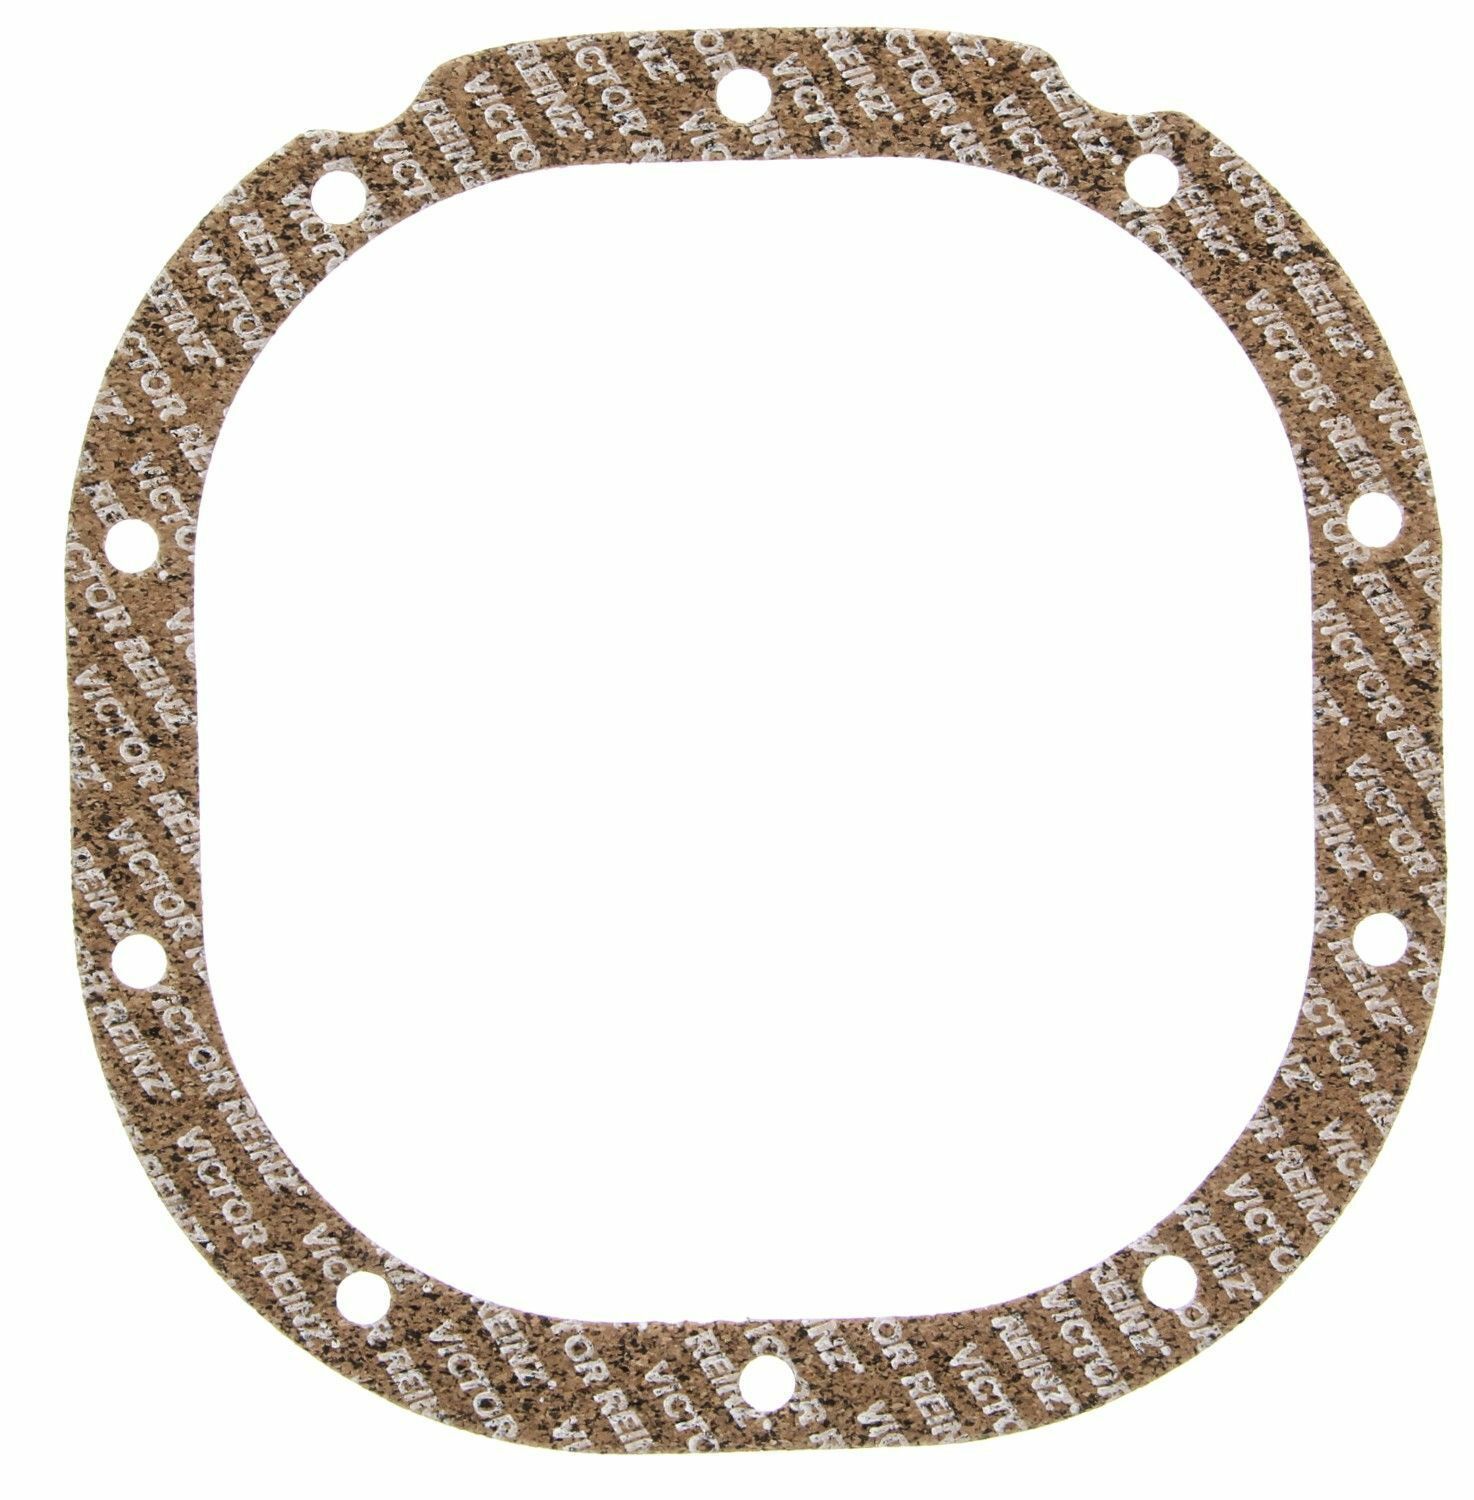 MAHLE Axle Housing Cover Gasket P27608TC